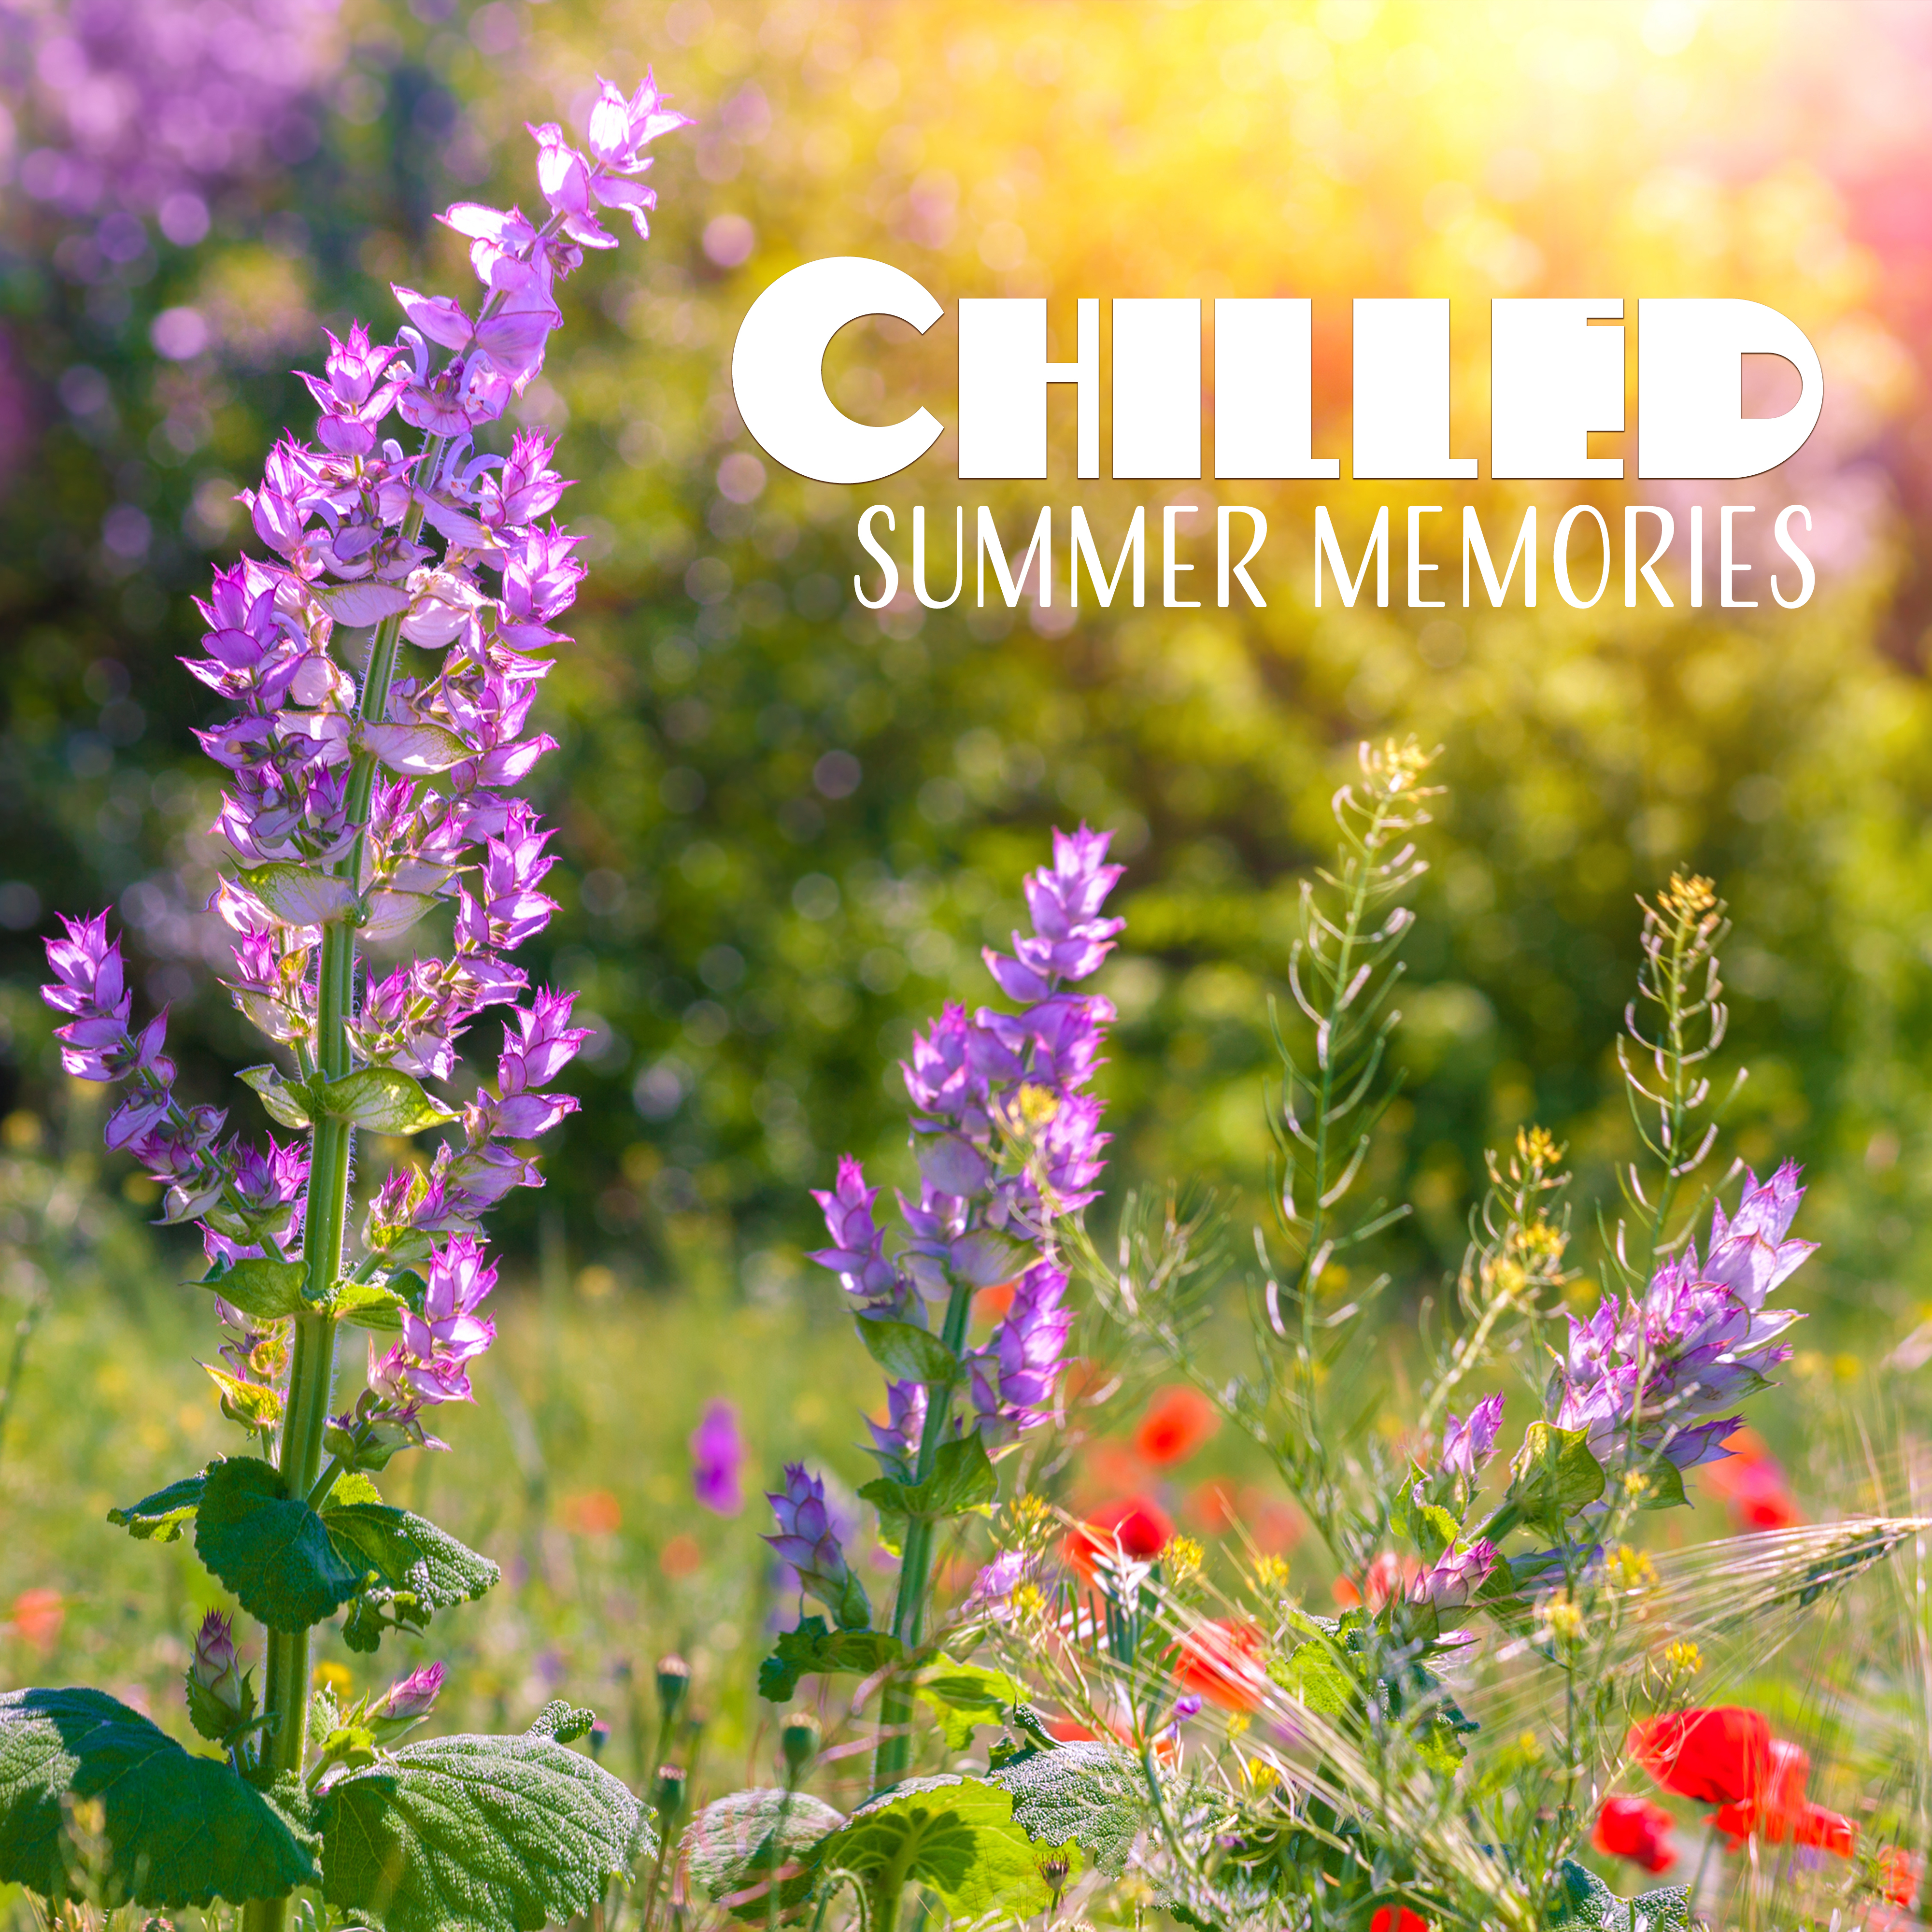 Chilled Summer Memories  Calming Sounds, Waves of Calmness, Chill Out Beats, Beach Lounge